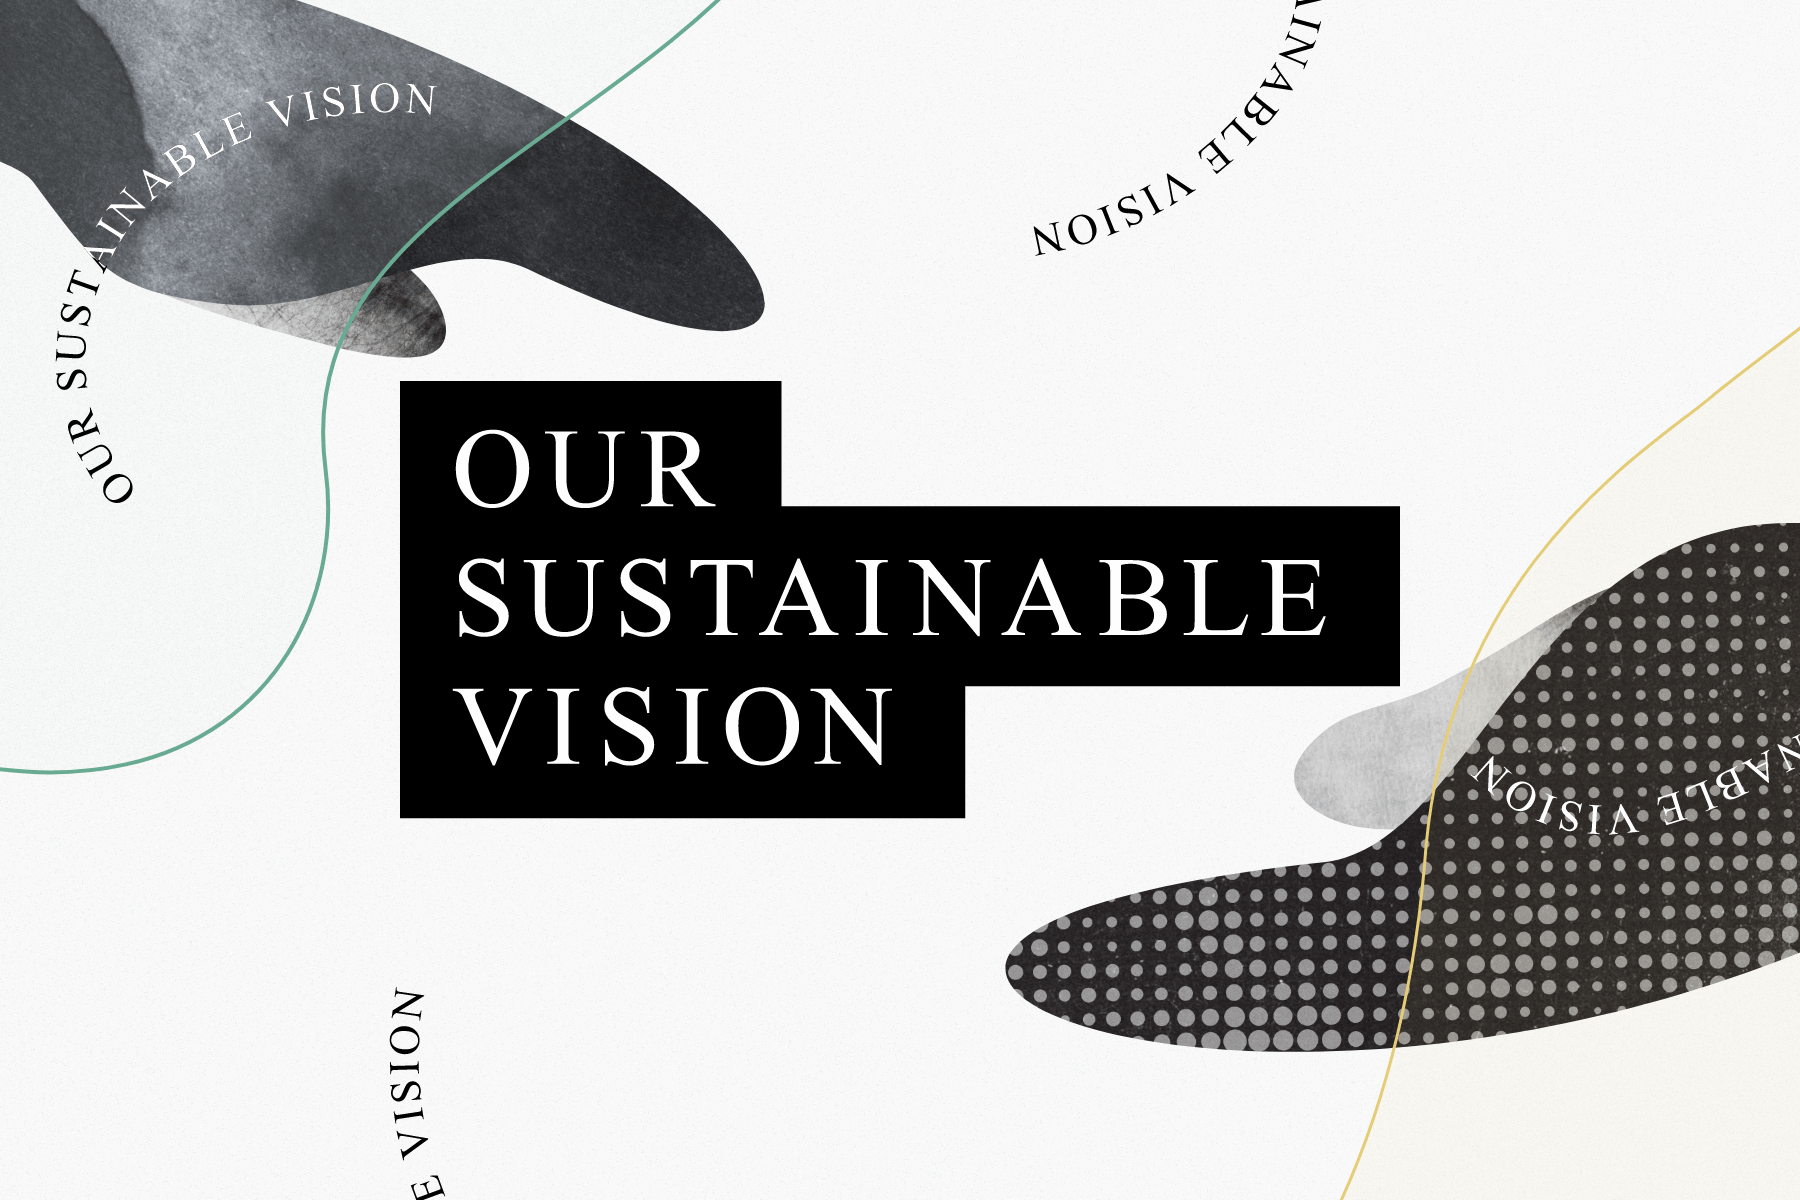 OUR SUSTAINABLE VISION